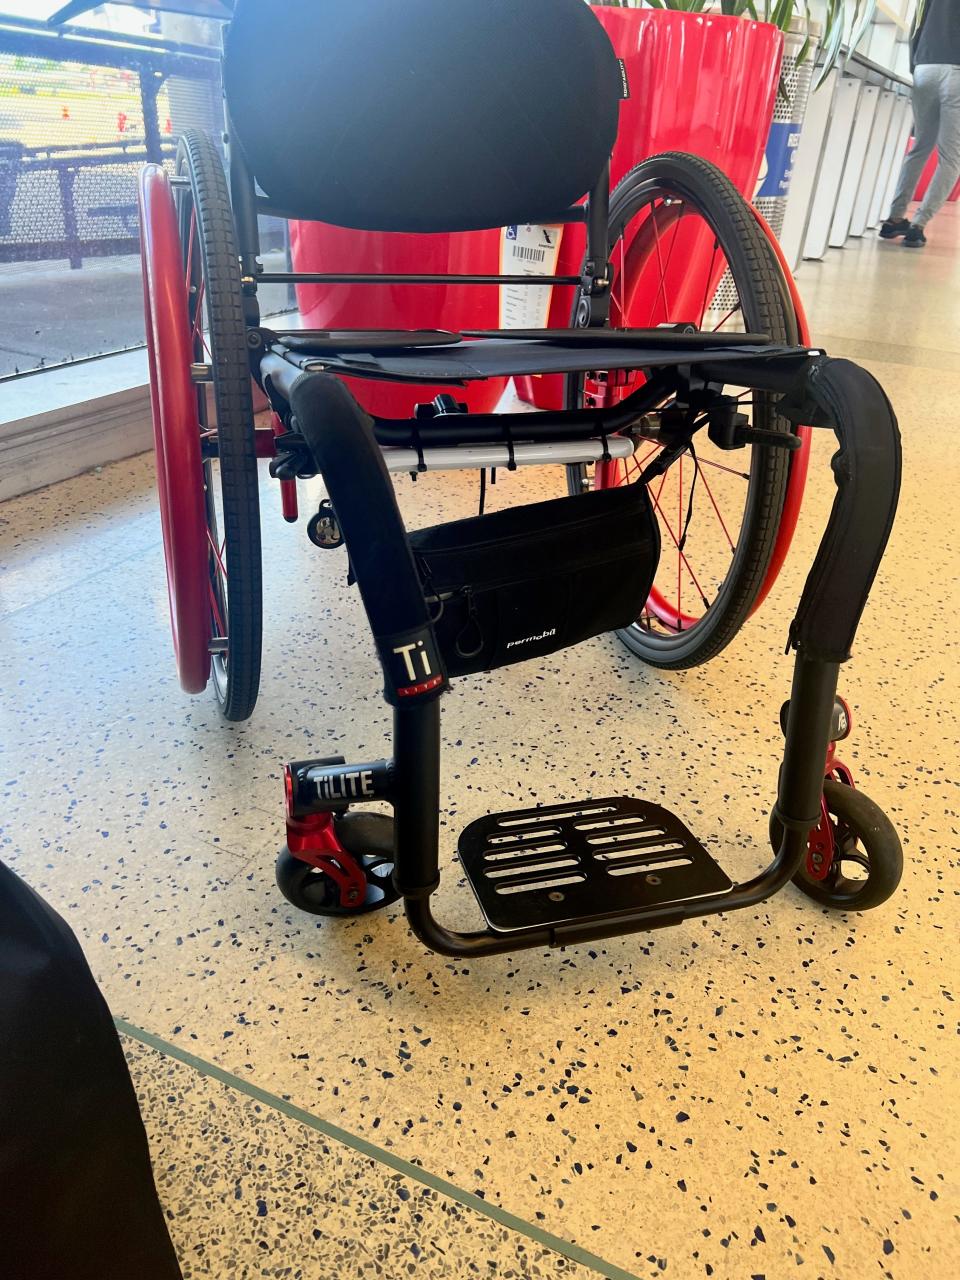 Damage to Stephanie Groce's wheelchair after it was dropped in Philadelphia.